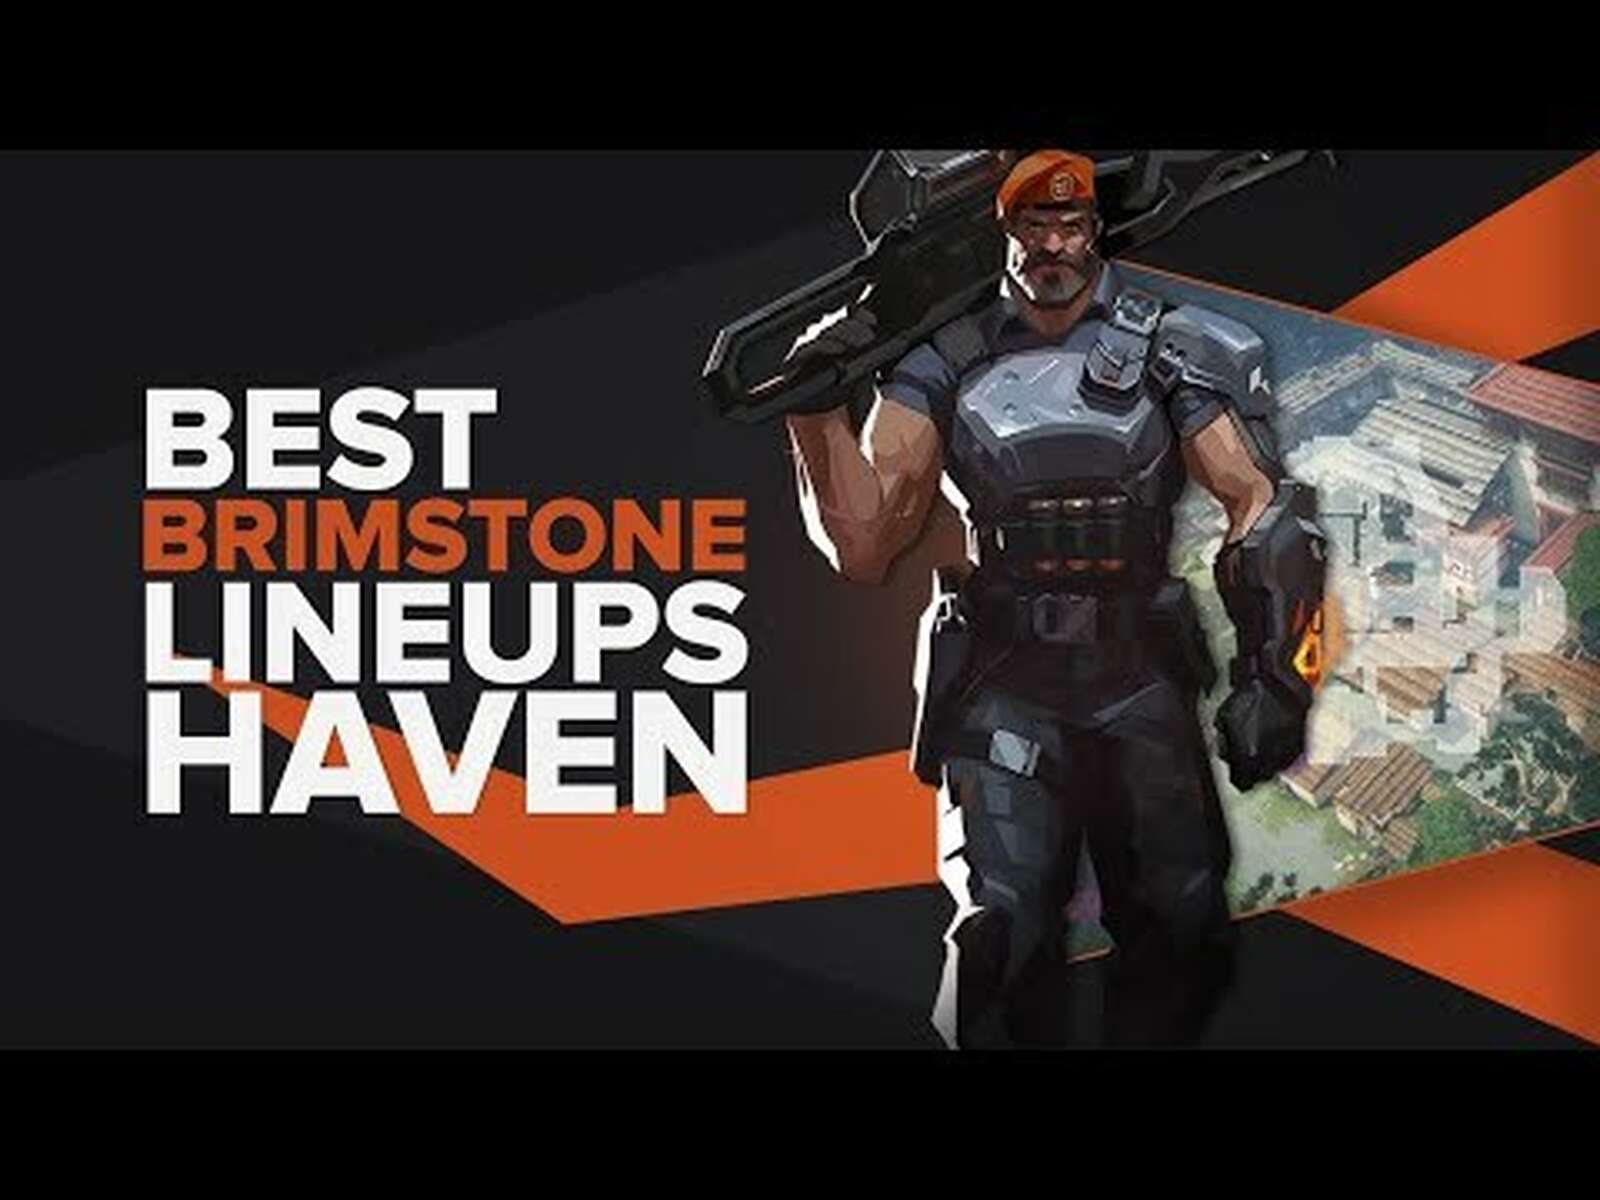 The Best Brimstone Lineups on Haven